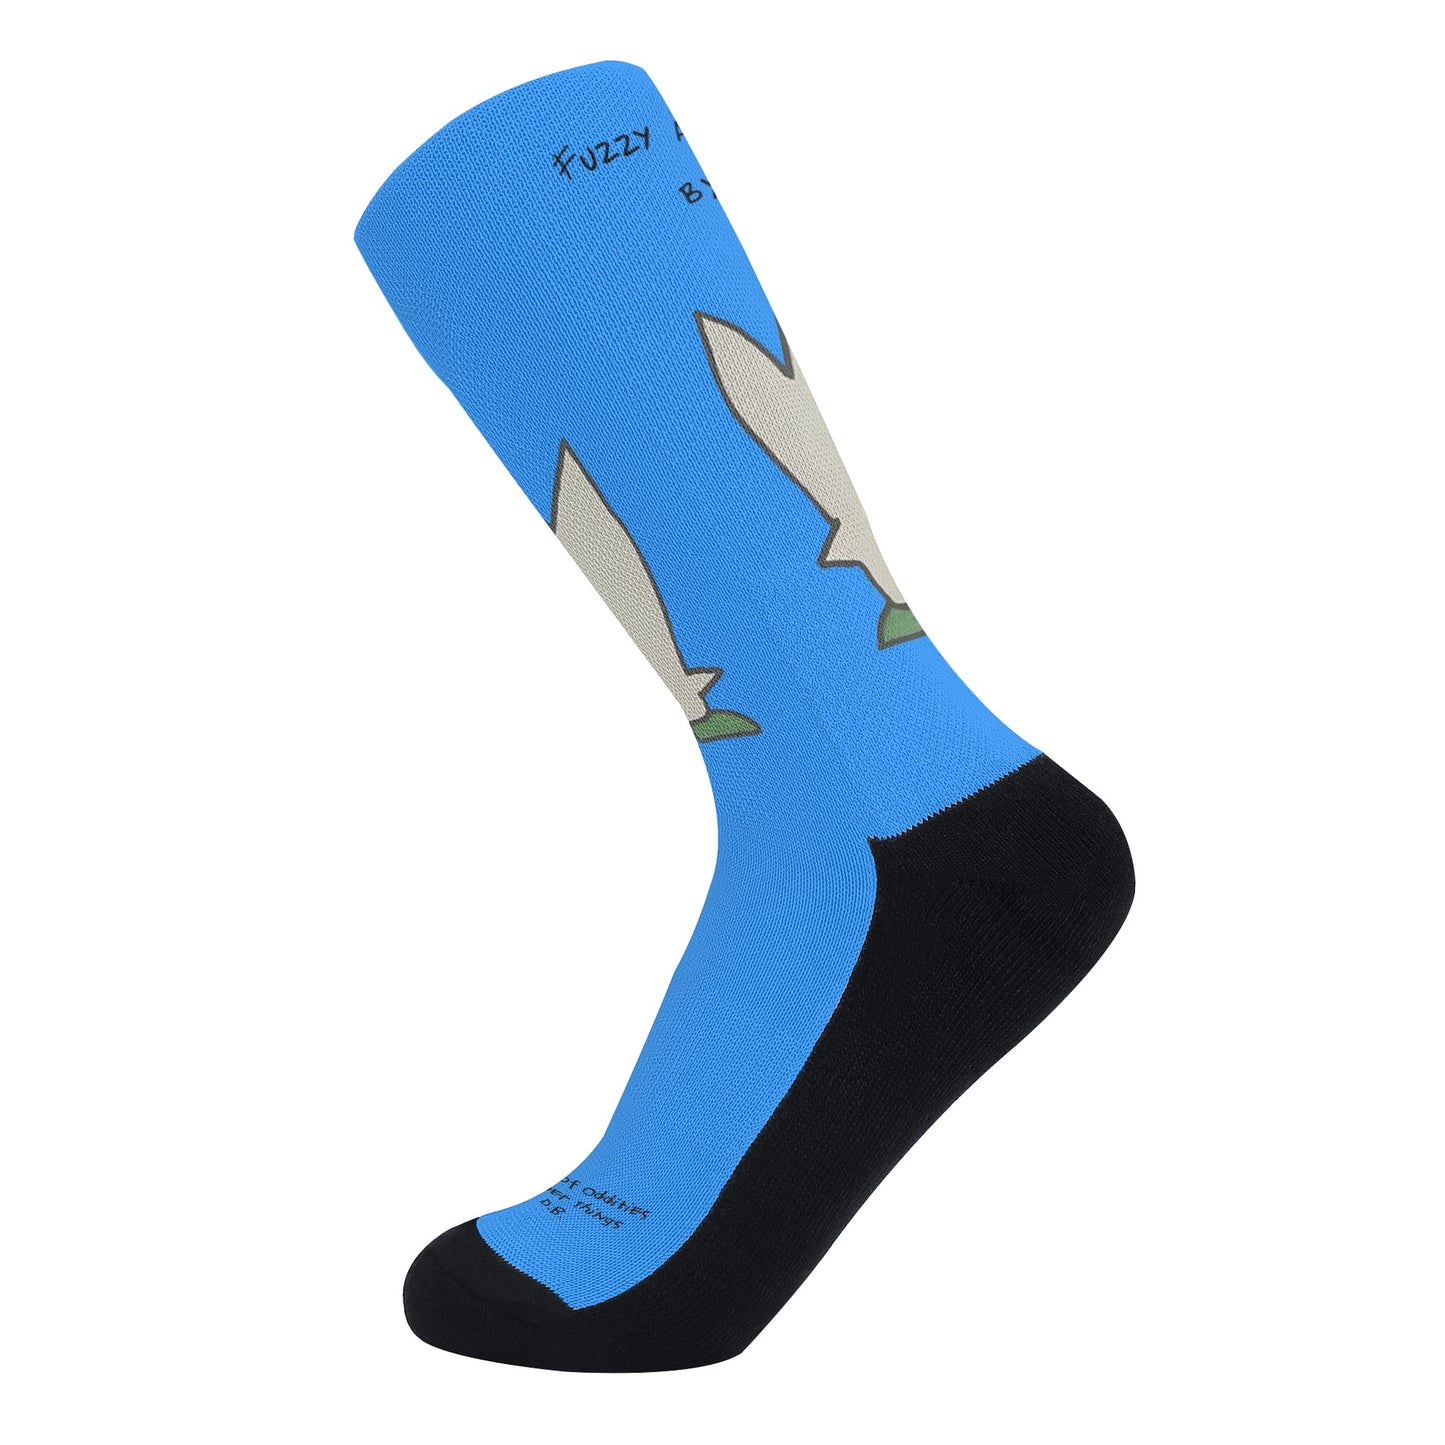 Fuzzy and Muffin by D.B. Wearable Art Comfy Funky Socks Sensory Friendly Seamless Toe (Blue)